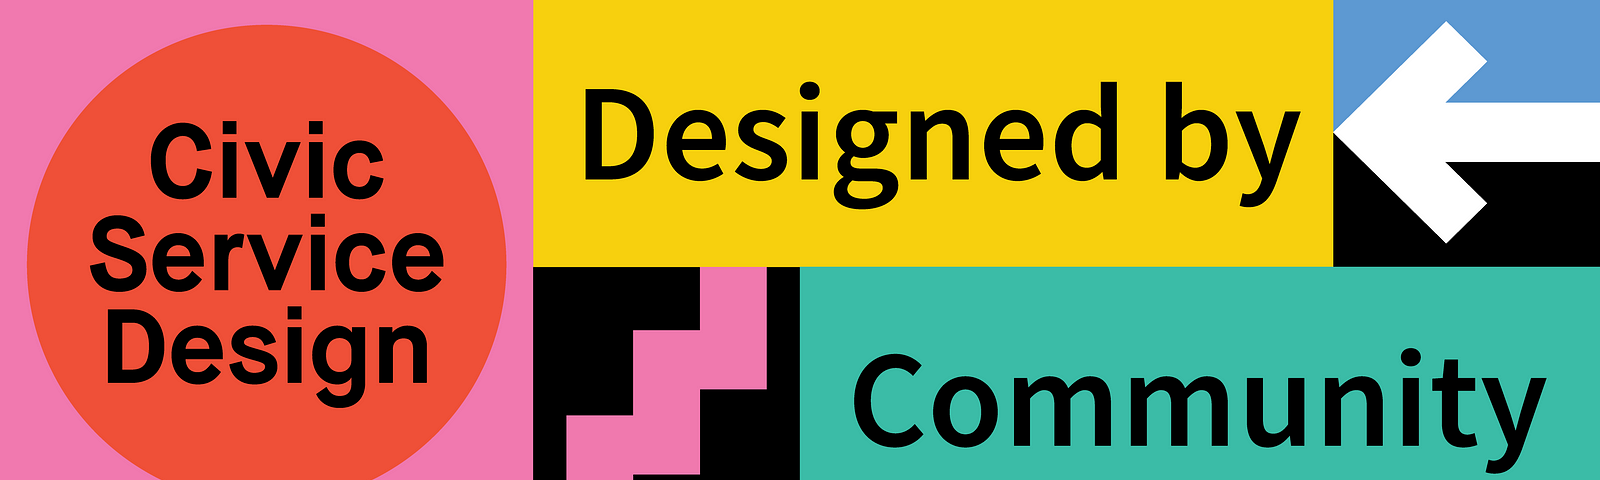 A colorful logo reads “Designed by Community”. A red circle on the left has the words written inside of it “Civic Service Design”